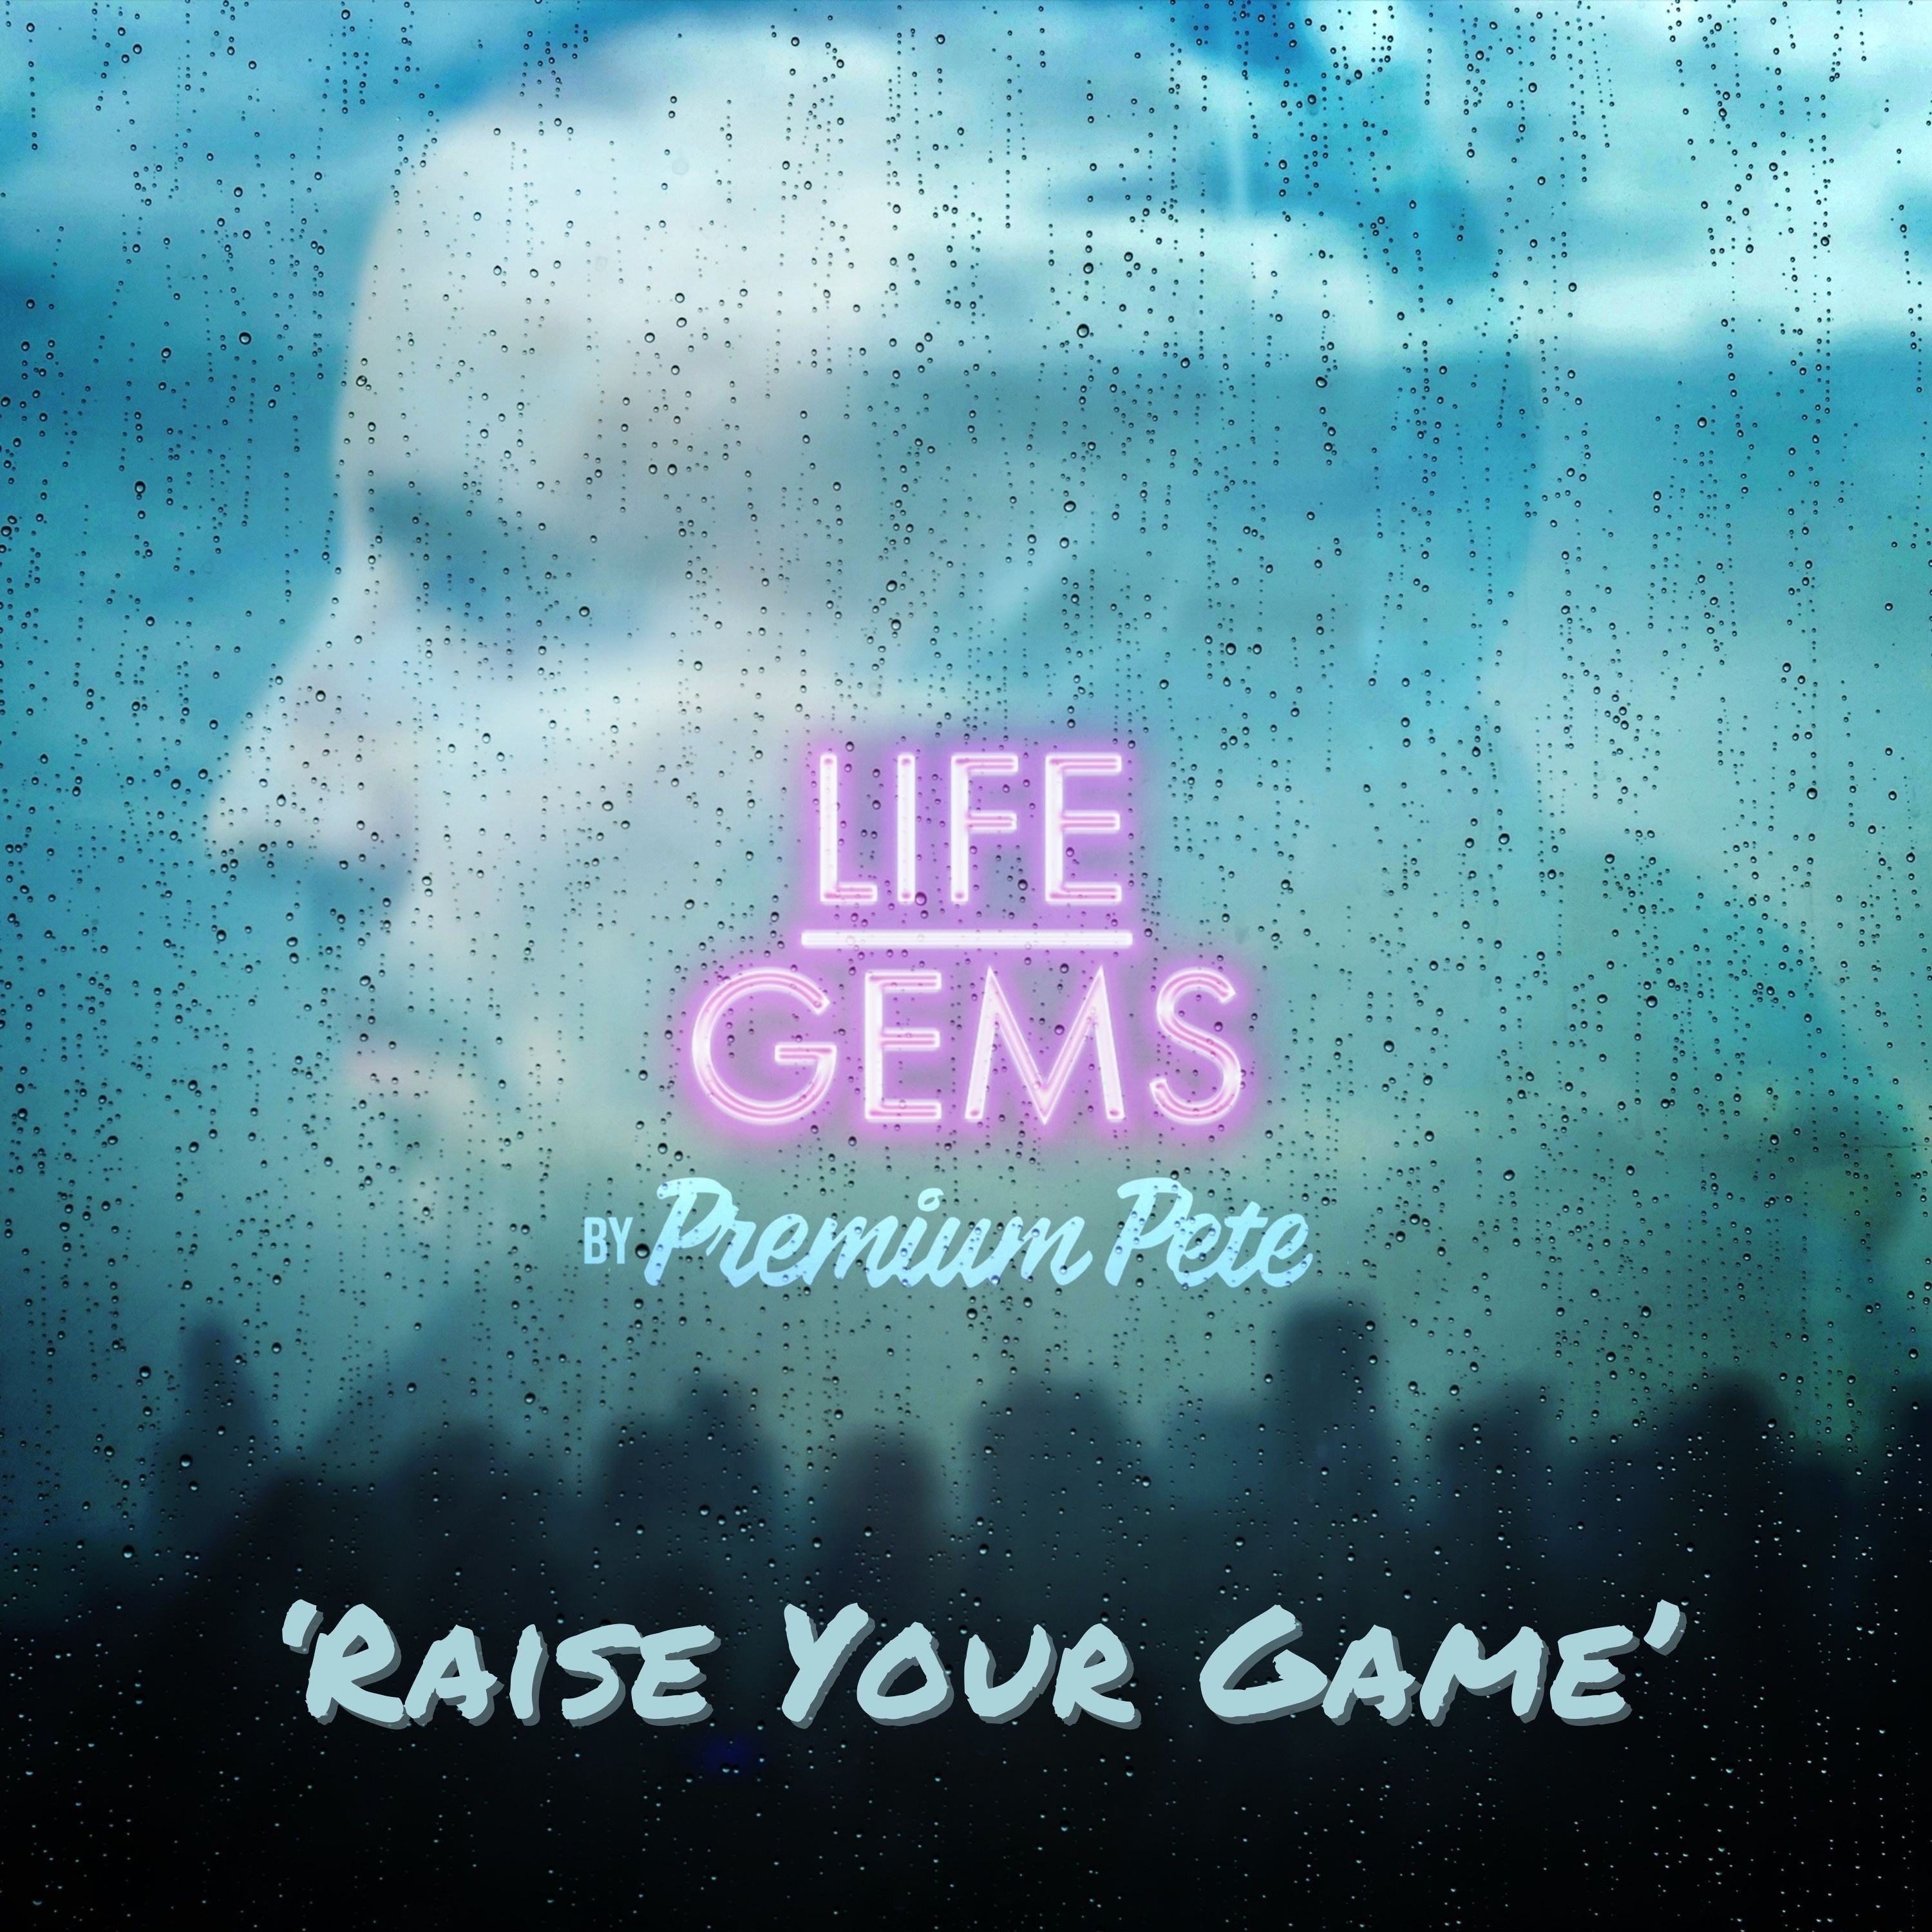 Life Gems "Raise Your Game"